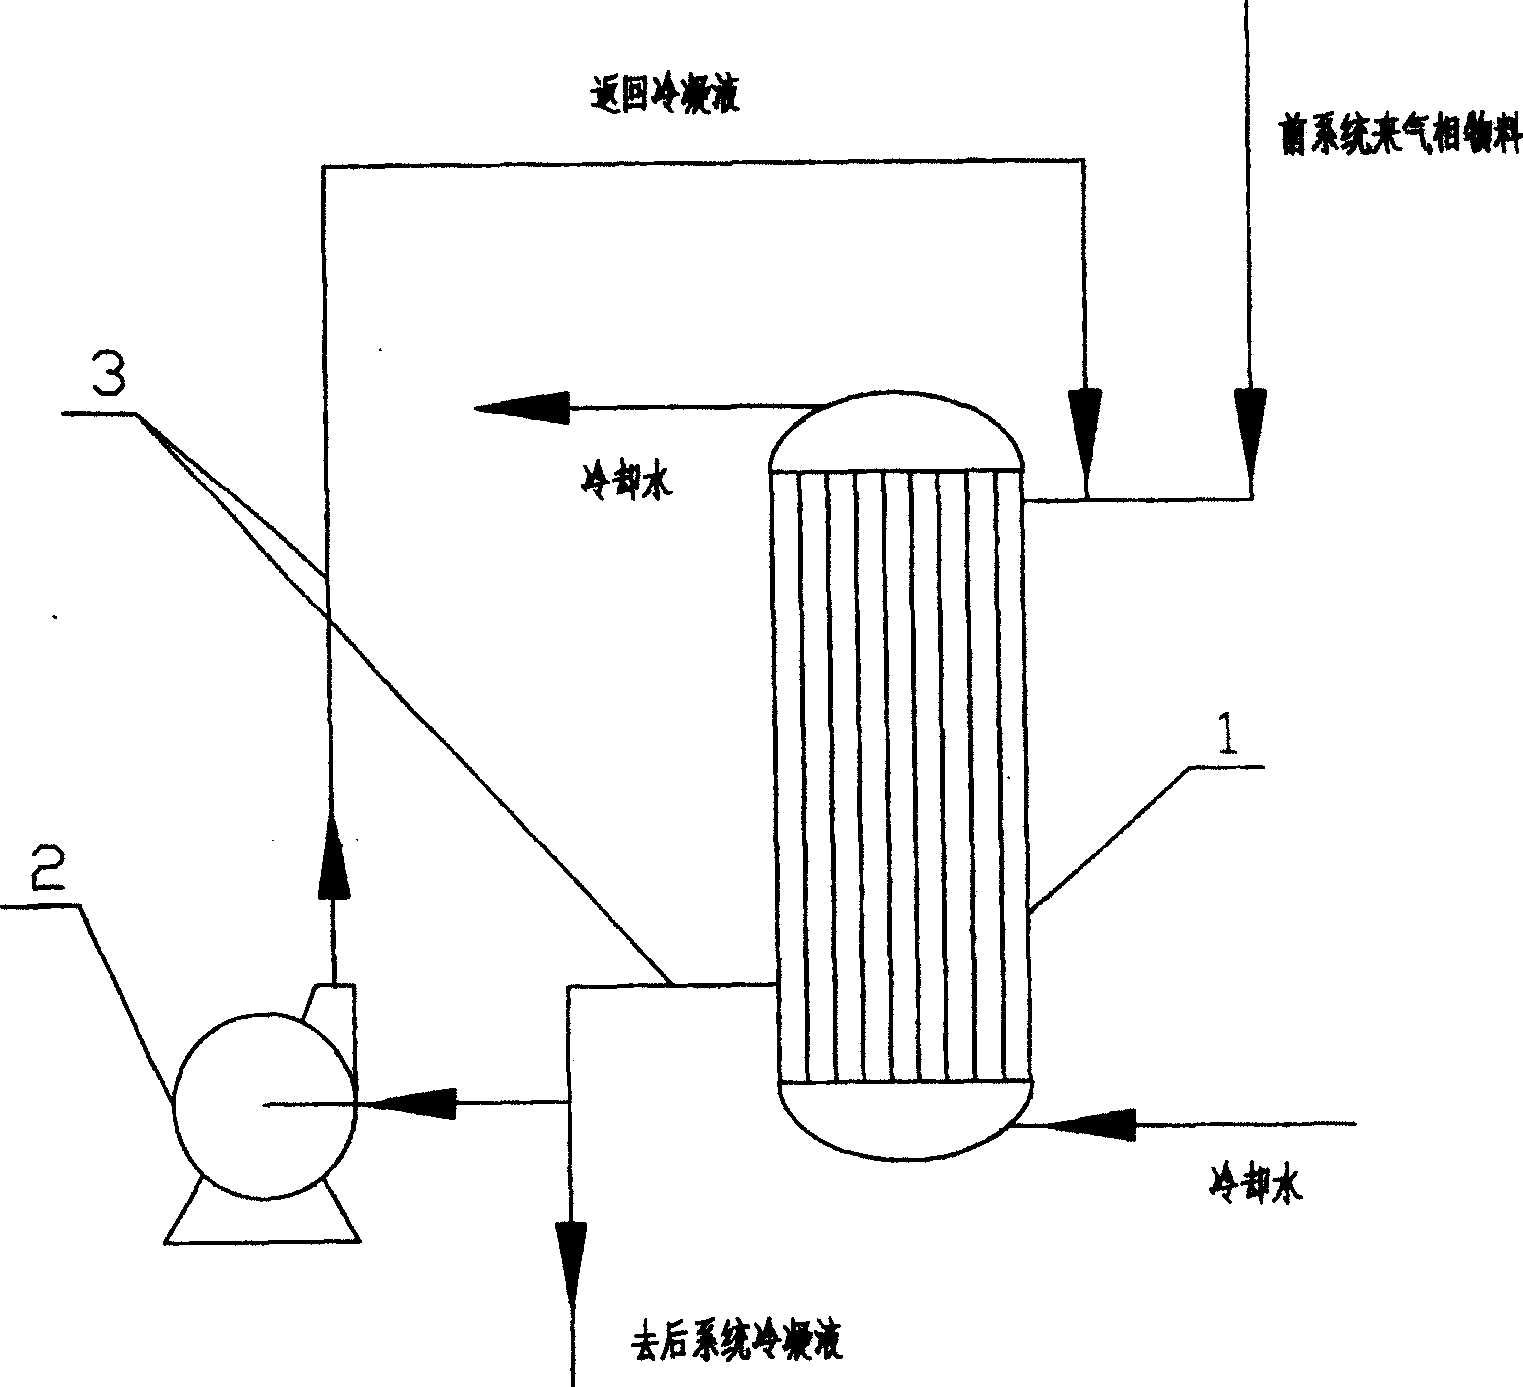 Self cleaning method for condenser for cooling easily condensate